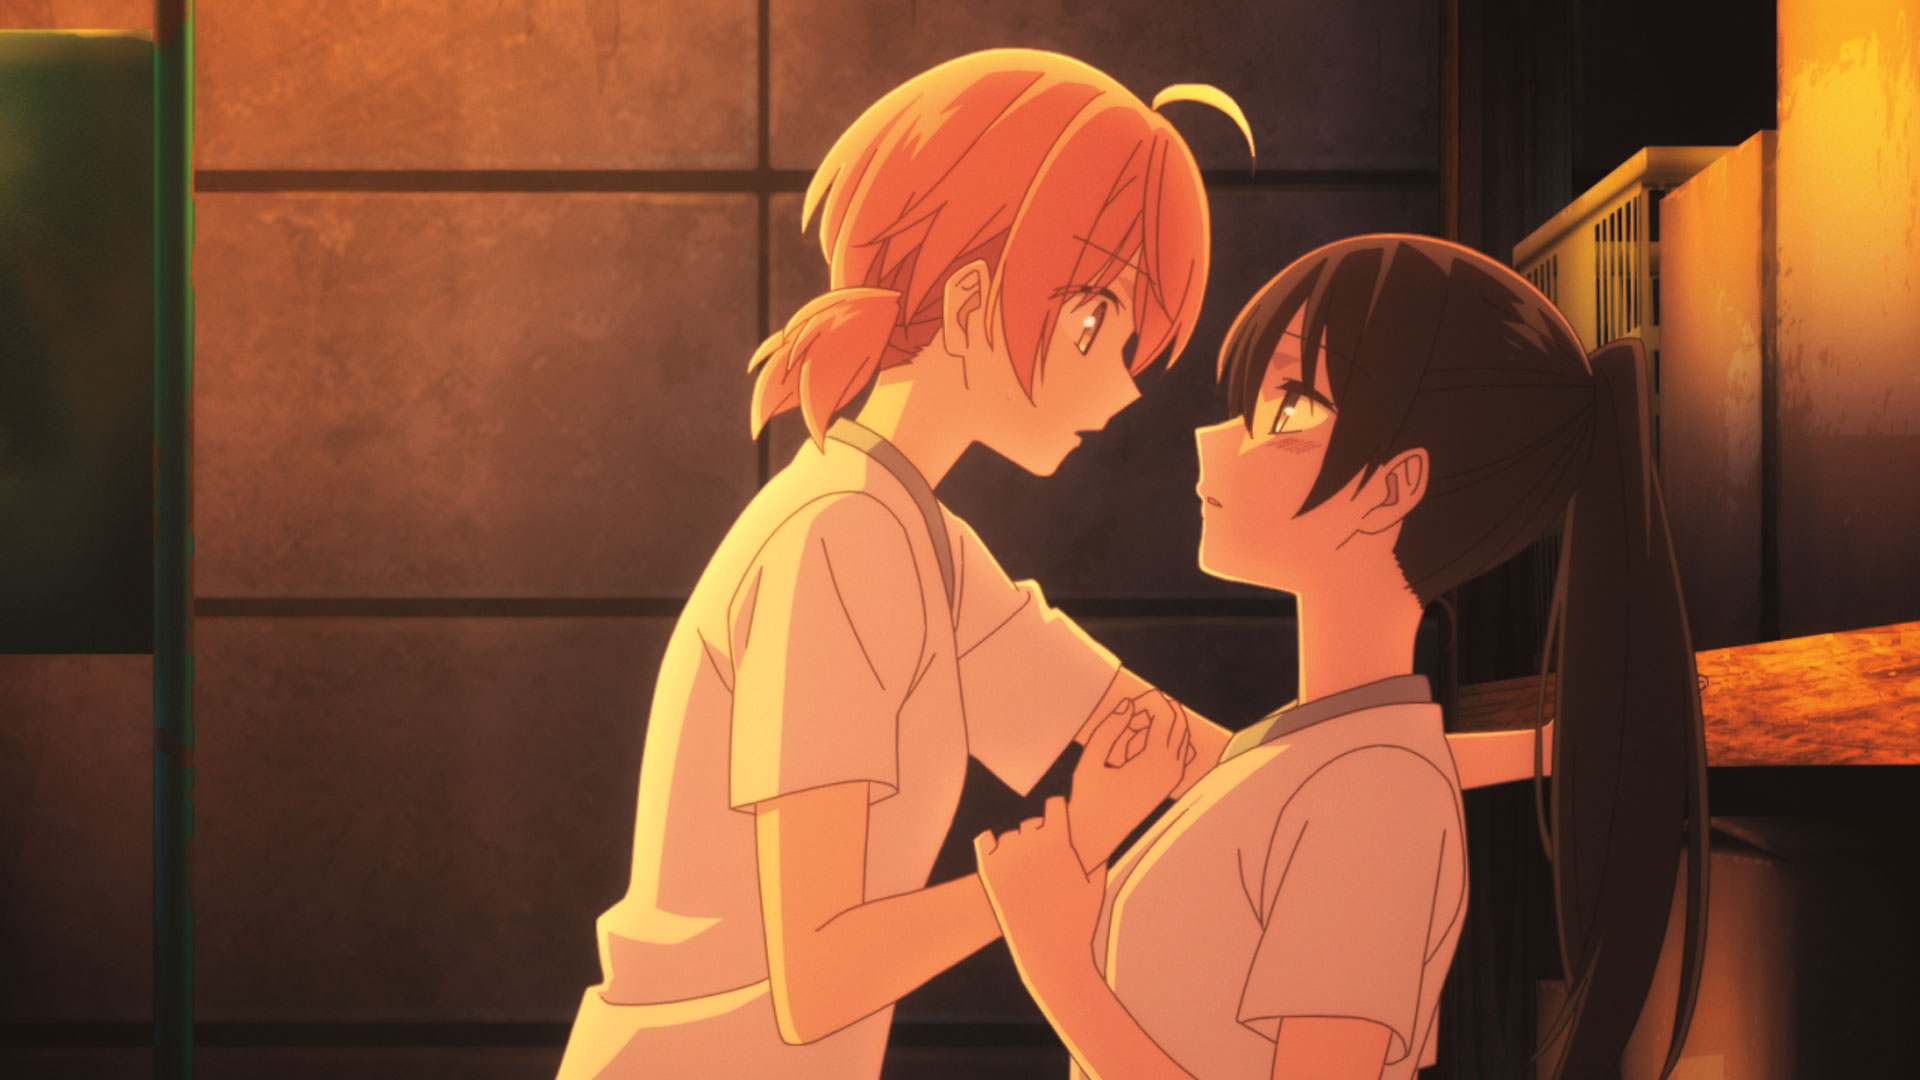 Bloom Into You 4